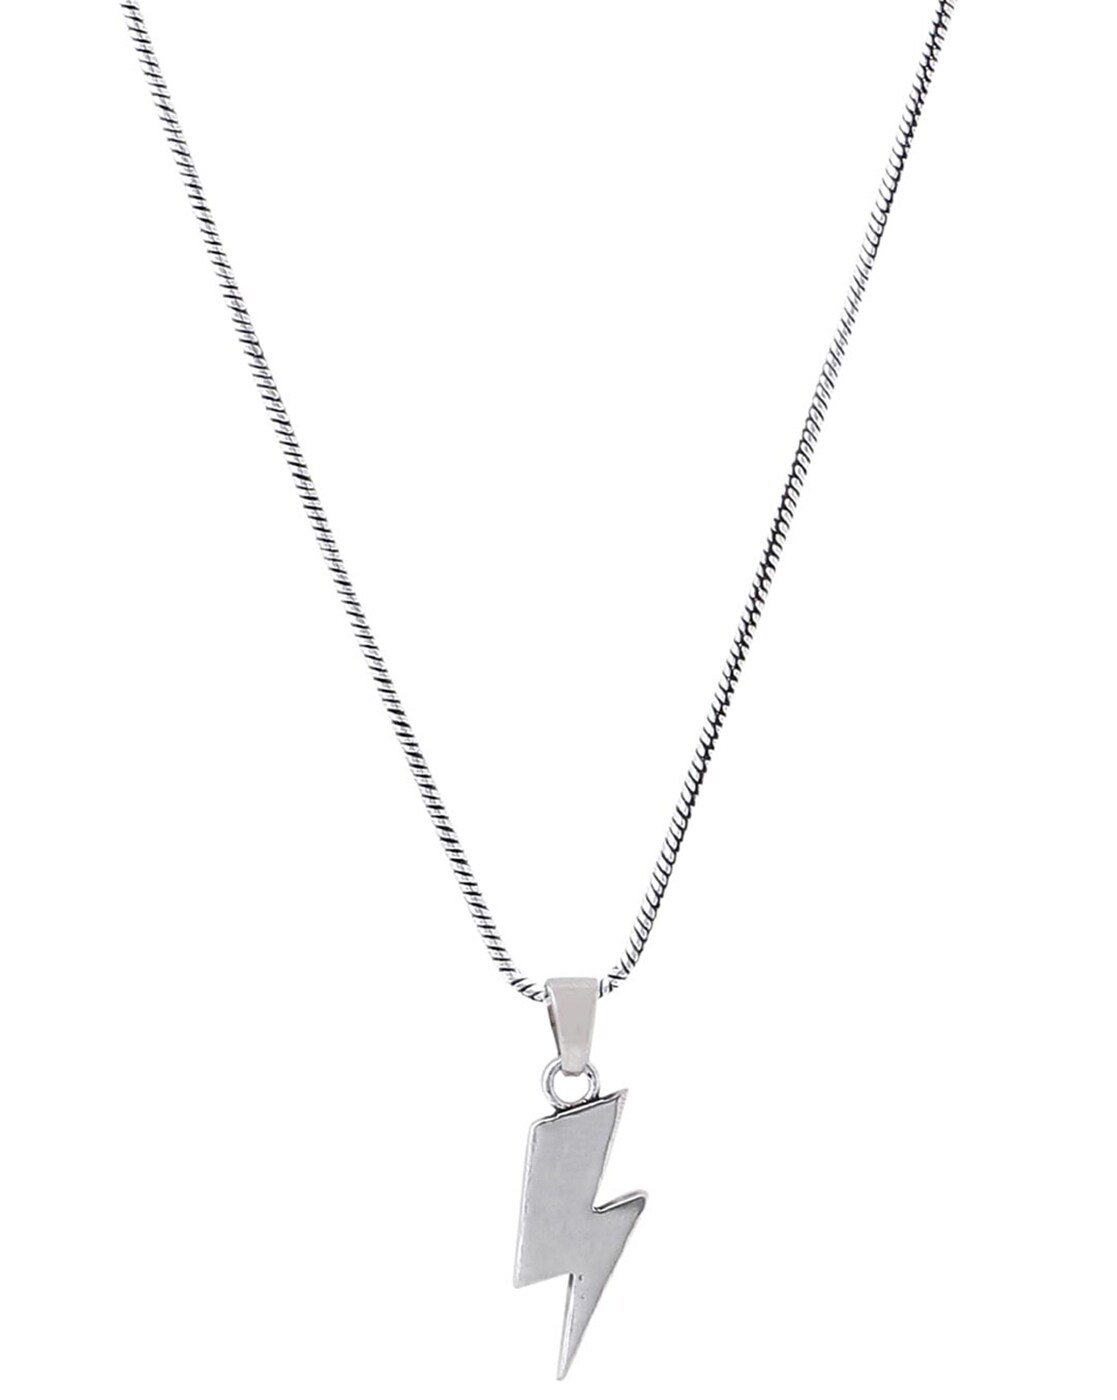 Buy Viraasi Lightning Bolt Pendant with Chain for Men and Boys at Amazon.in